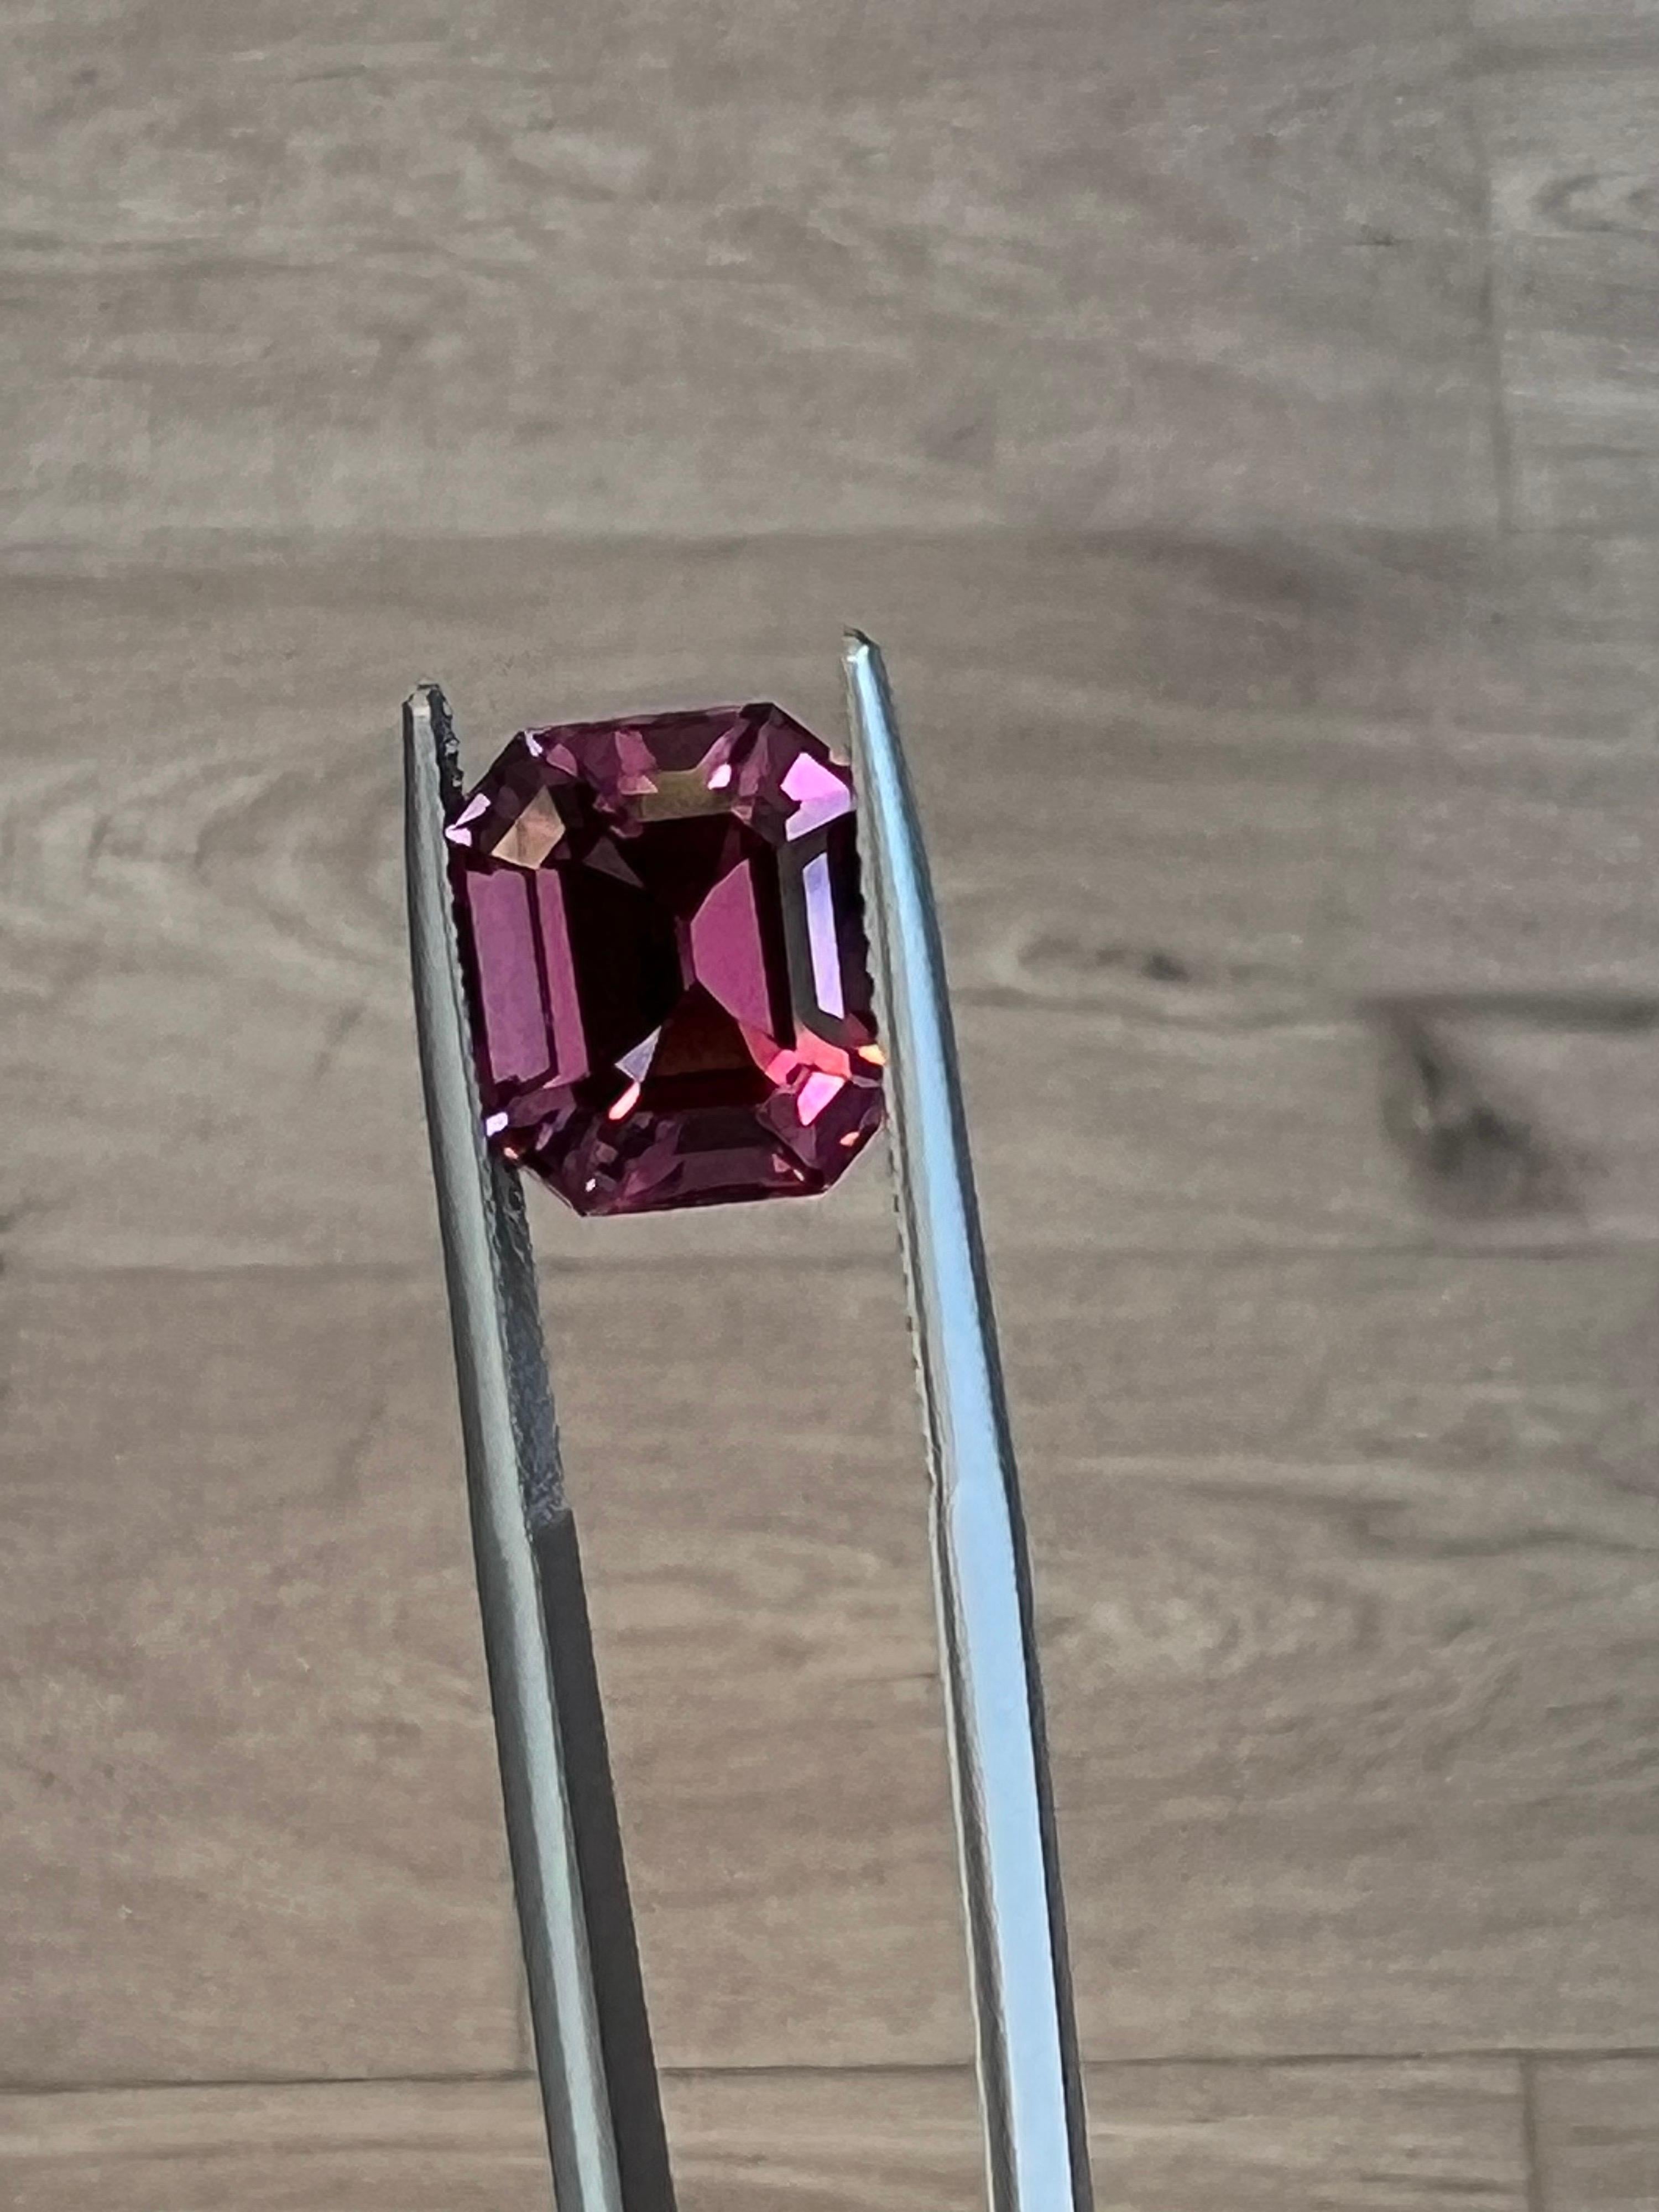 Contemporary Pink Spinel Ring Gem 6.04 Carat Emerald Cut Loose Gemstone Loupe Clean For Sale